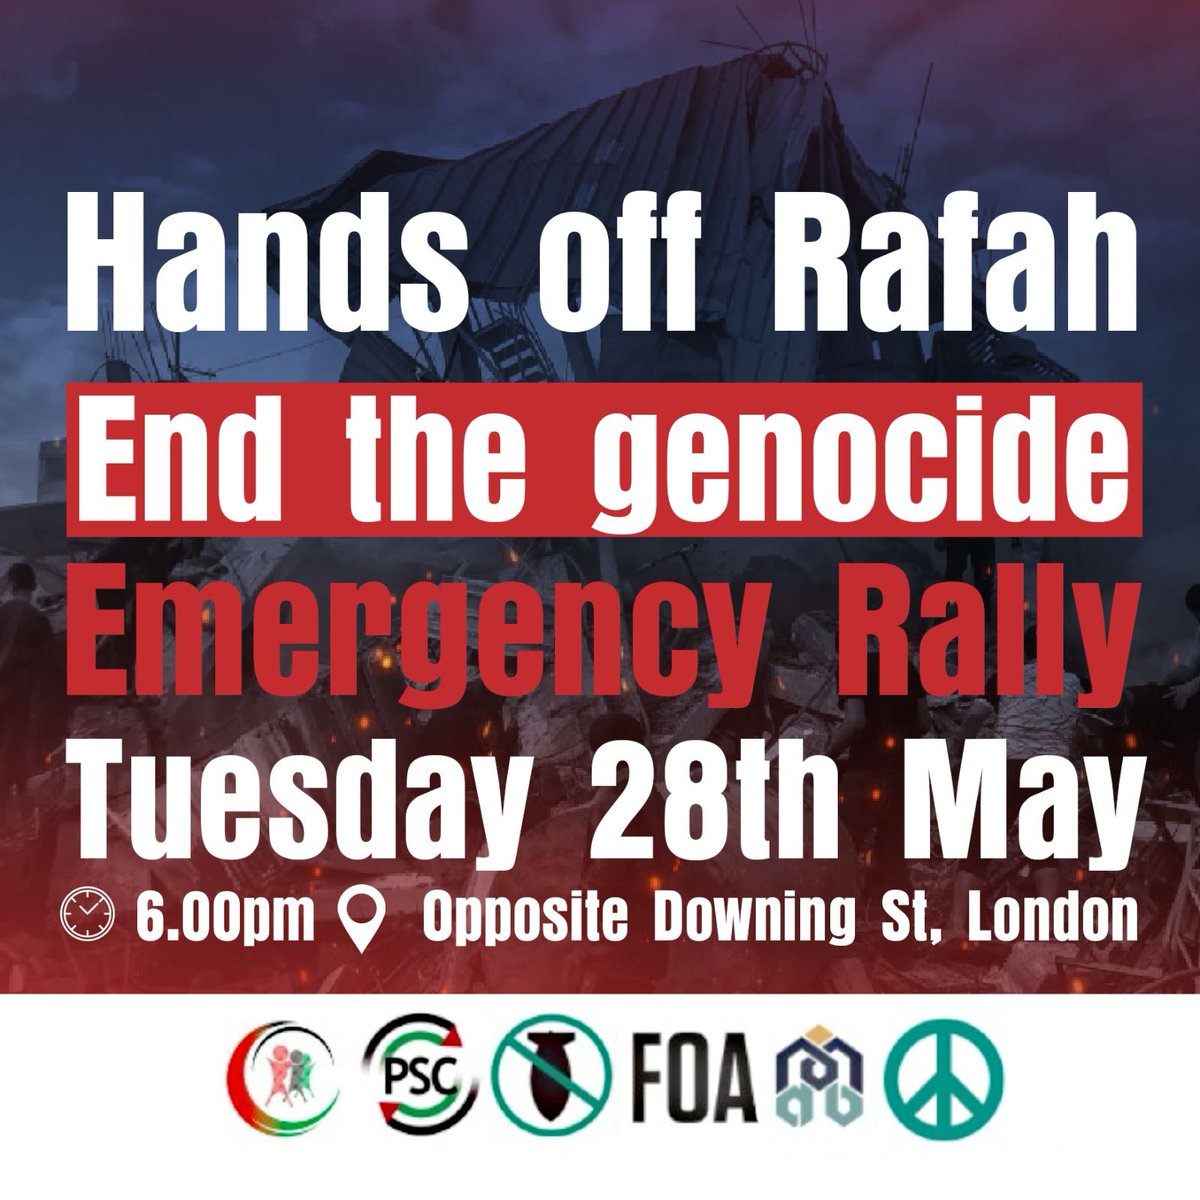 🚨TODAY - EMERGENCY DEMO - DOWNING STREET, 6PM 🇵🇸

Israel has bombed a refugee camp in Rafah, killing at least 50 civilians. They have ignored the ICJ ruling demanding they end their offensive. Join us as we demand our government take action to #StopGazaGenocide‌ 

#HandsOffRafah